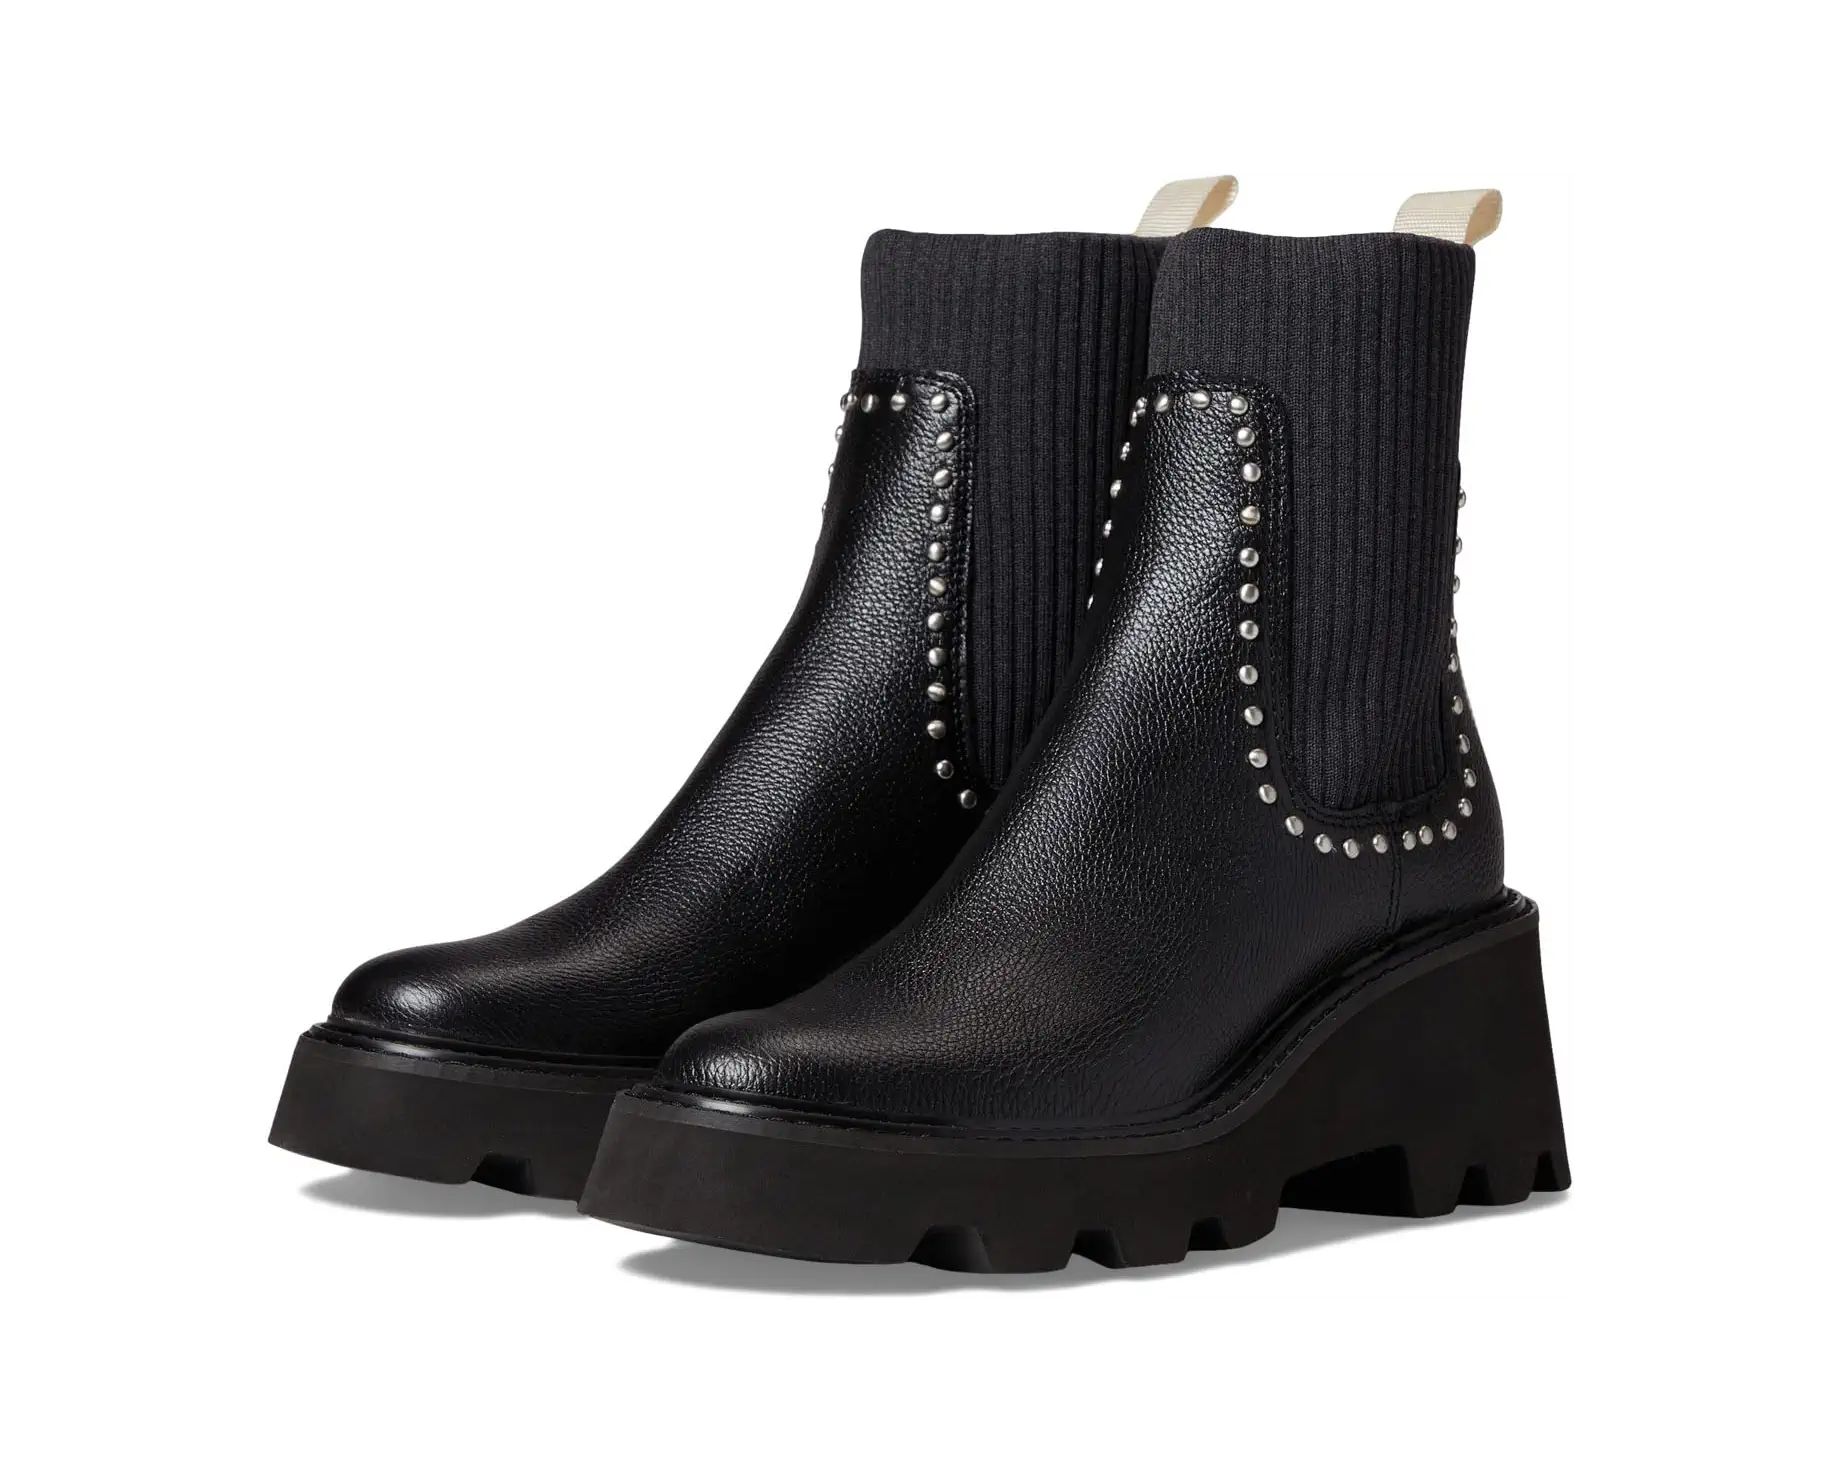 Hoven Stud H2O | Zappos